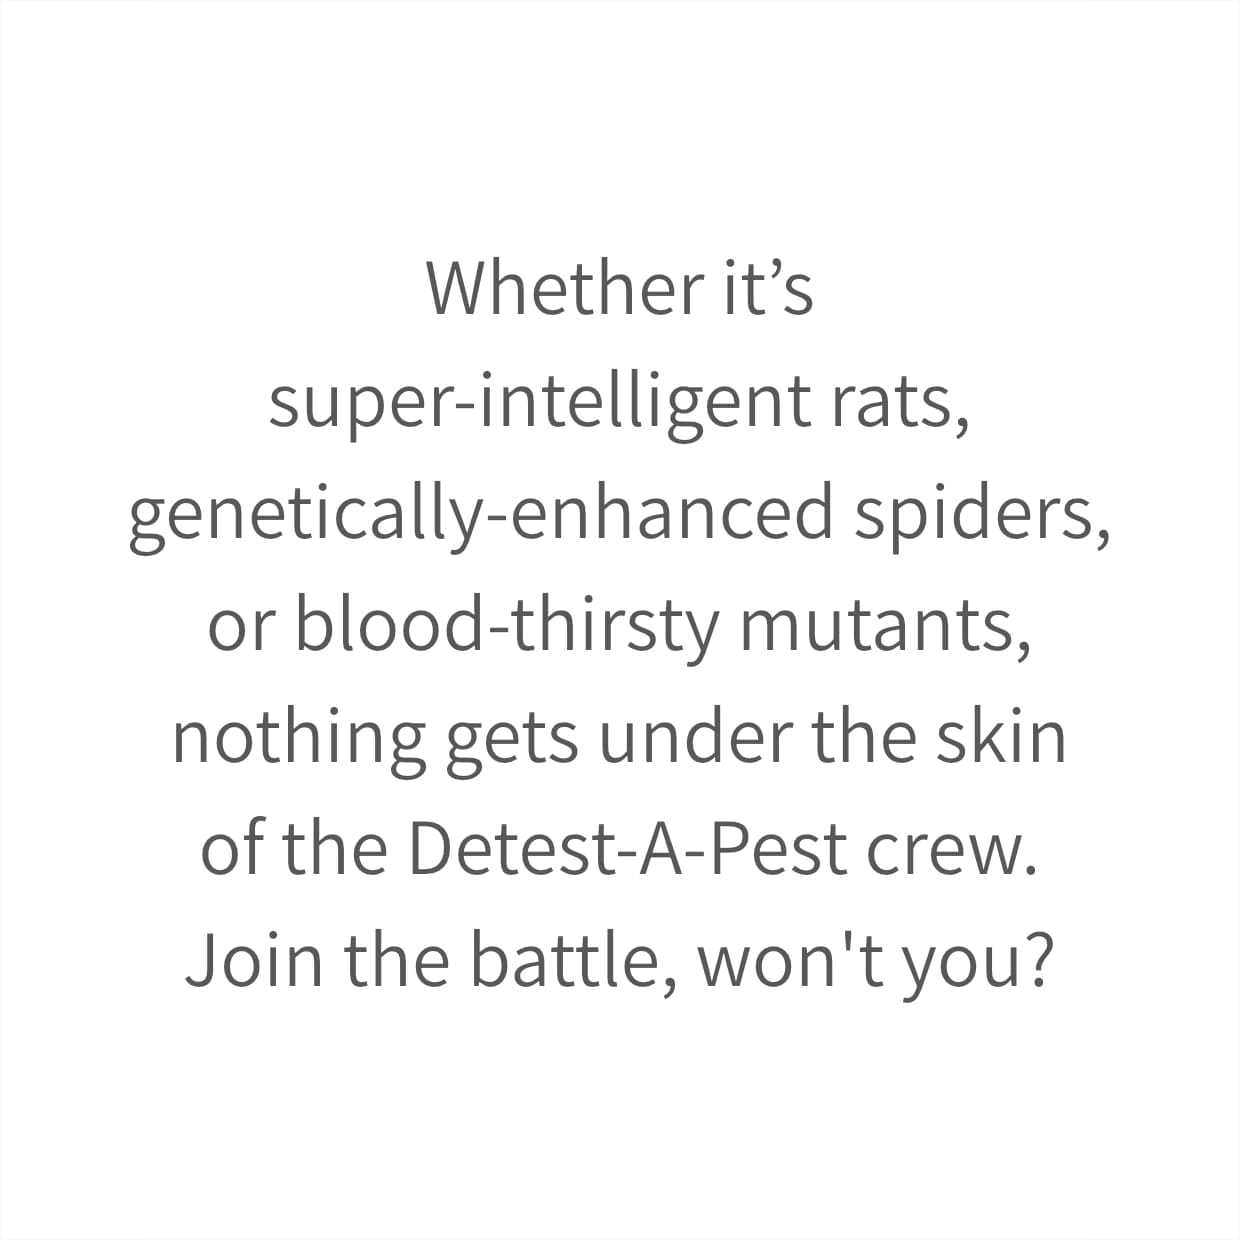 Whether it’s super-intelligent rats, genetically-enhanced spiders, or blood-thirsty mutants, nothing gets under the skin of the Detest-A-Pest crew. Join the battle, won't you?